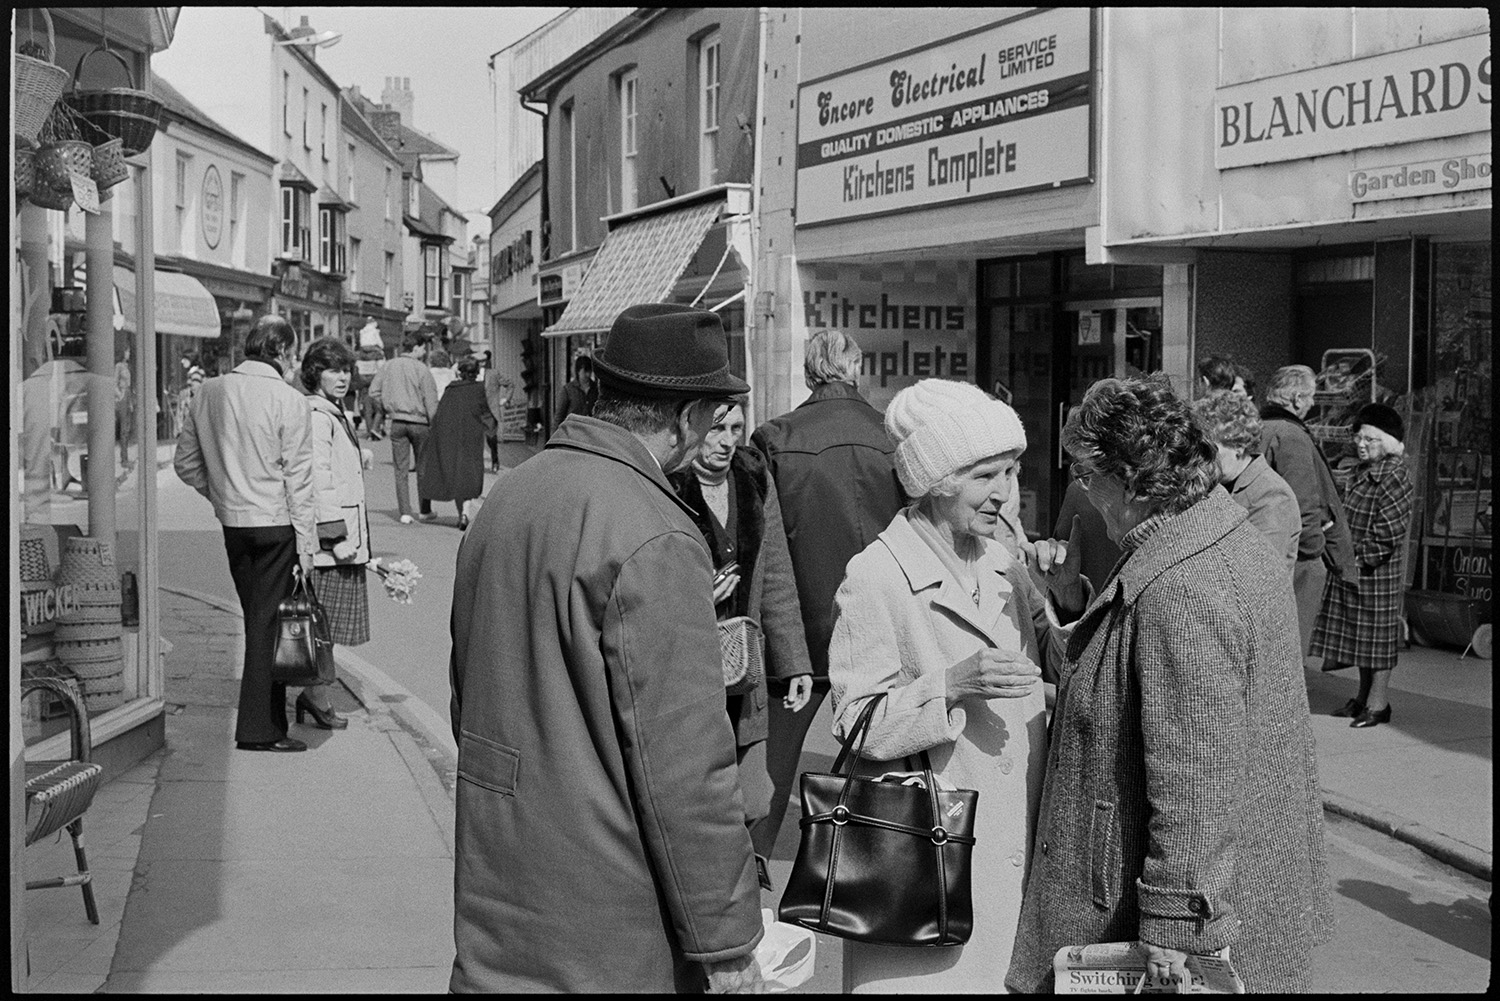 People chatting in street, woman shopping. 
[Men and women chatting in Mill Street, Bideford outside 'Blanchards' and 'Encore Electrical' shop fronts. One of the women is wearing a woolly hat. Other shoppers can be seen in the street in the background.